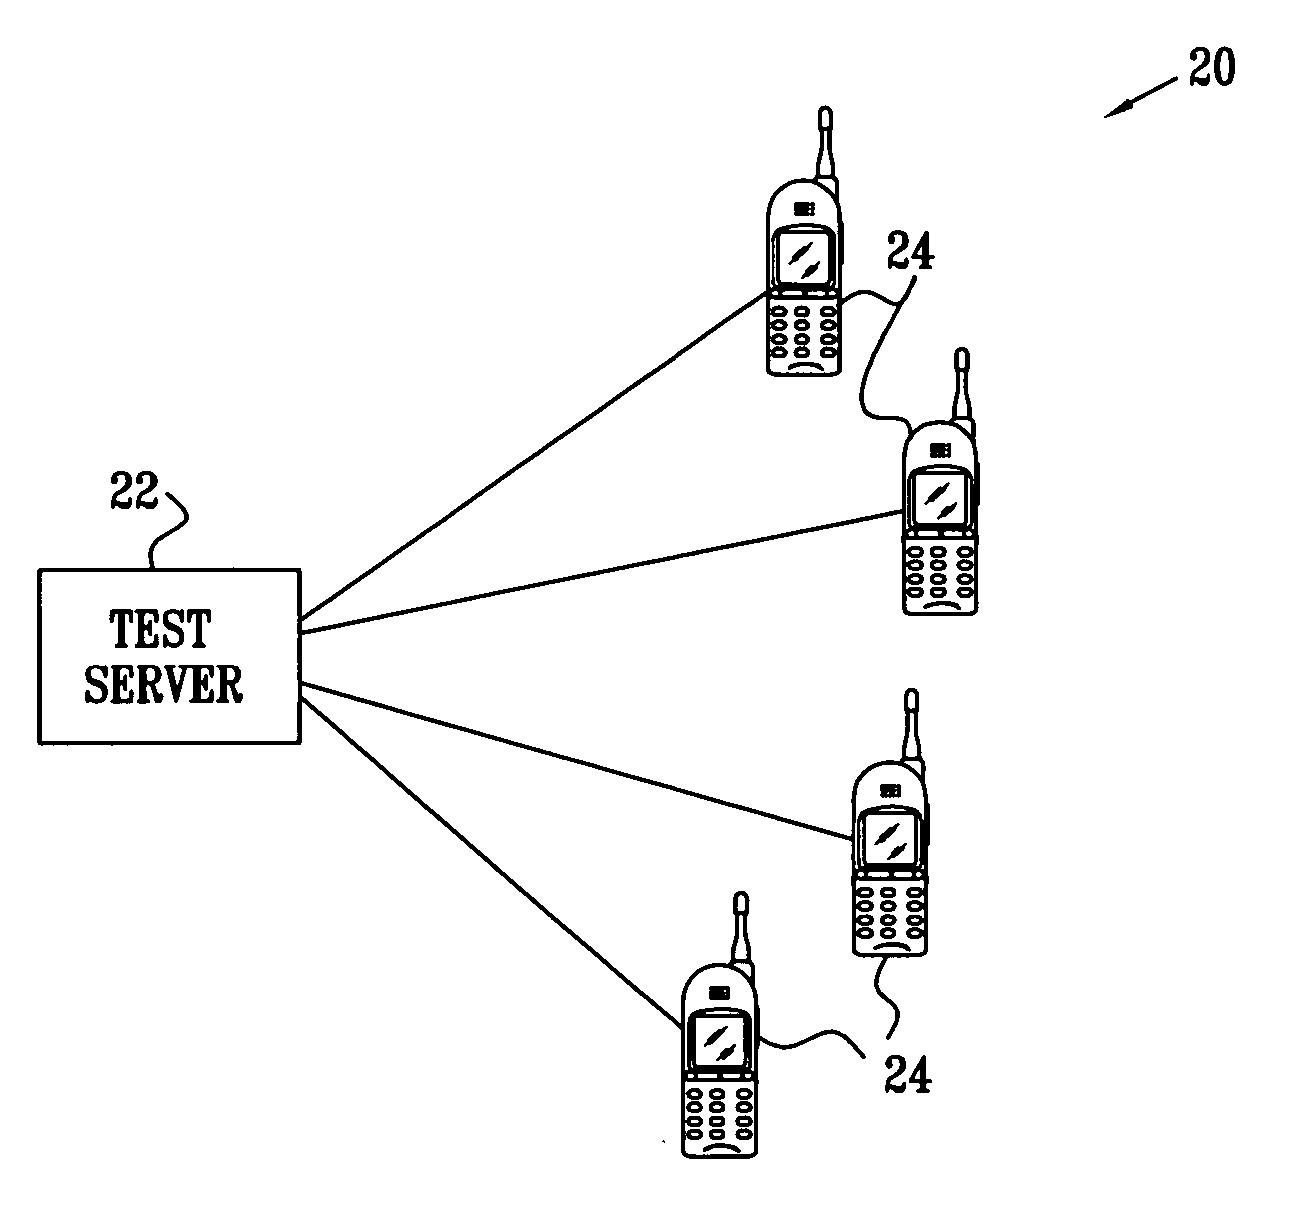 Simultaneous execution of test suites on different platforms